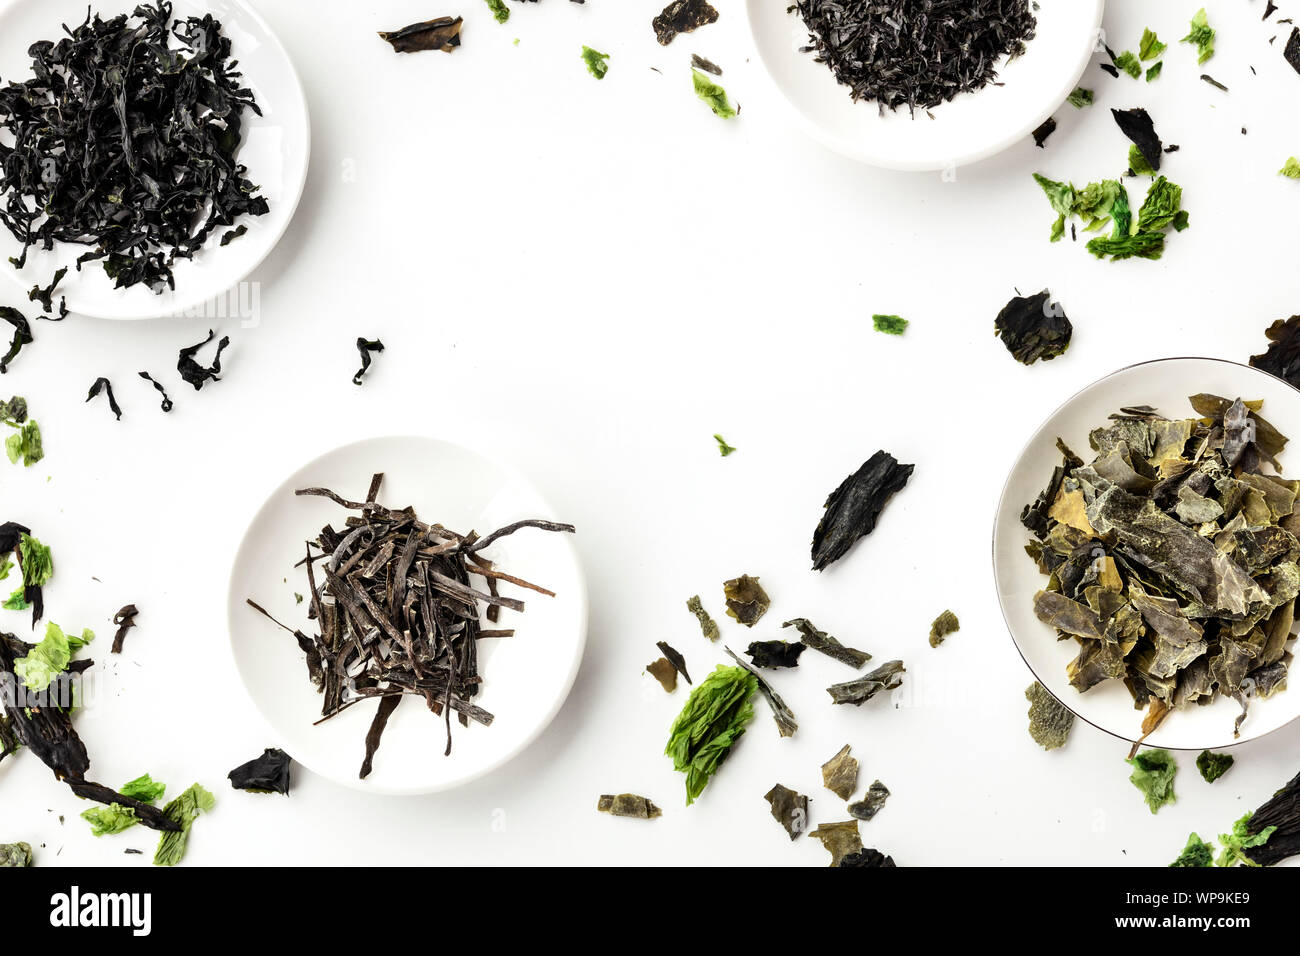 Dry seaweed, sea vegetables, shot from above on white, forming a frame. Superfoods background with a place for text Stock Photo